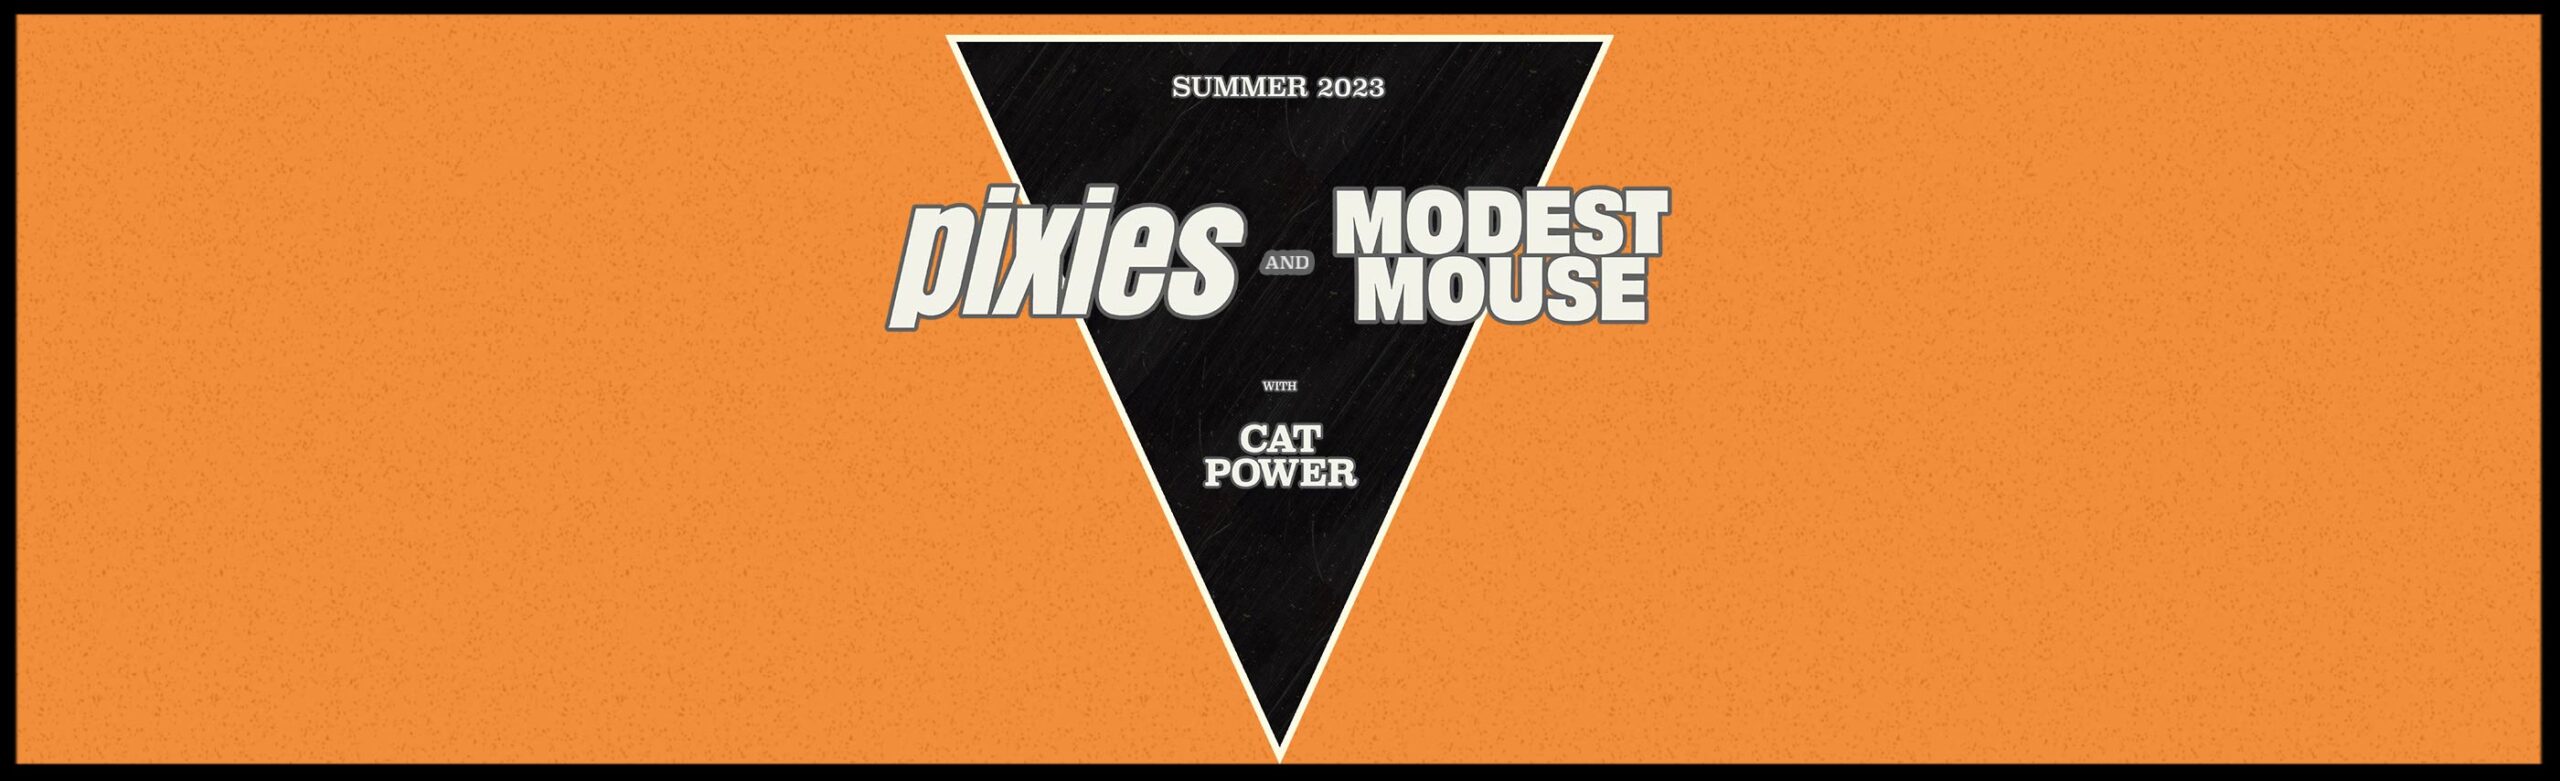 Pixies and Modest Mouse to Coheadline KettleHouse Amphitheater in 2023 with Cat Power Image